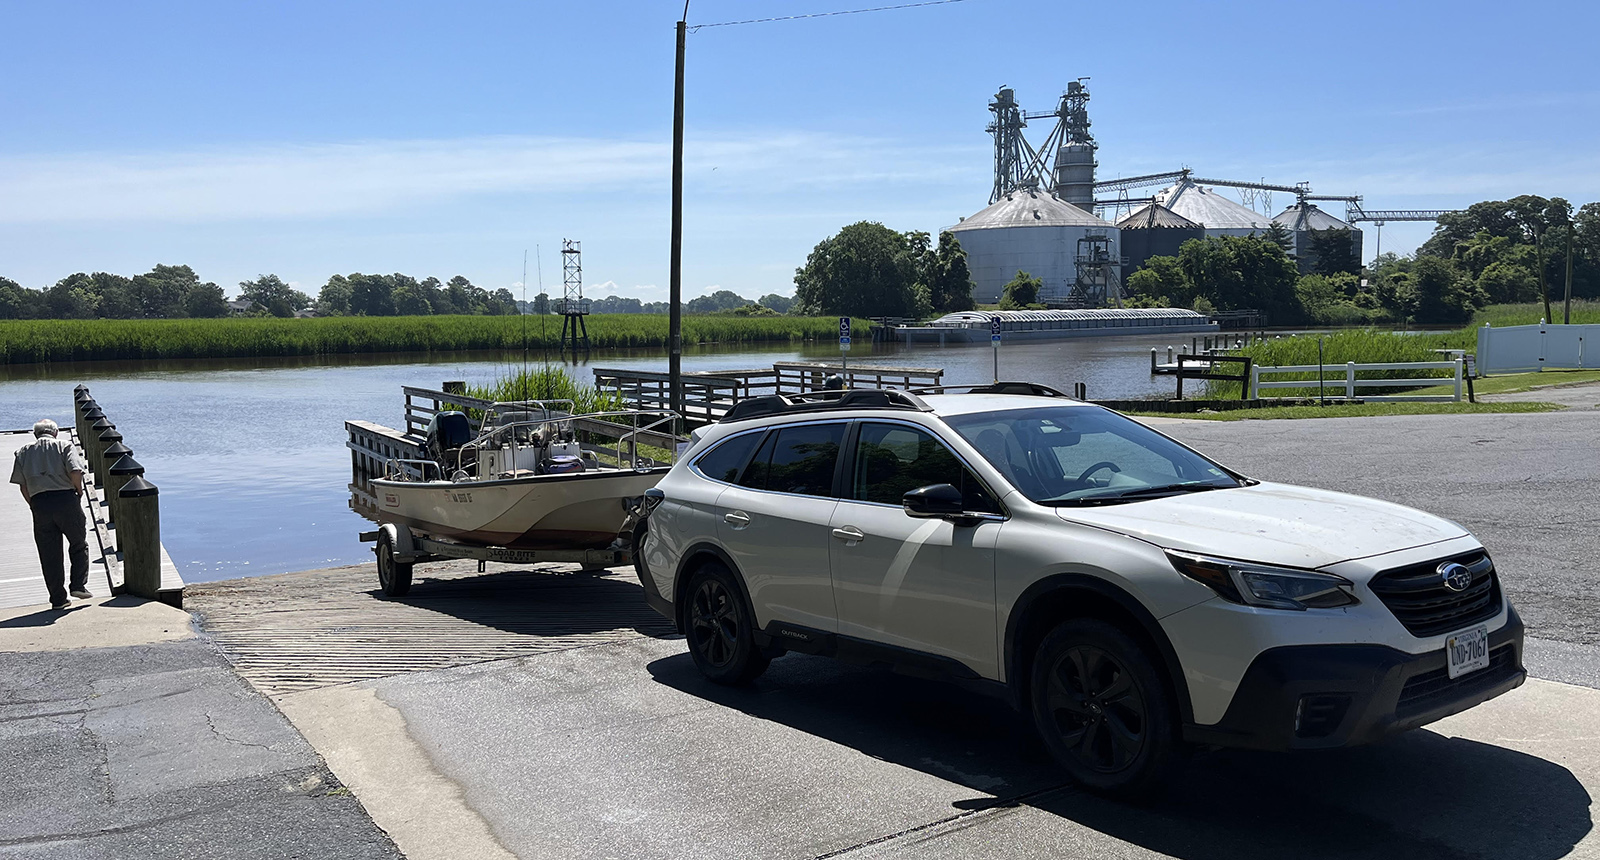 A photo of a car pulling a small motor boat and about to back down a boat ramp incline to the river.